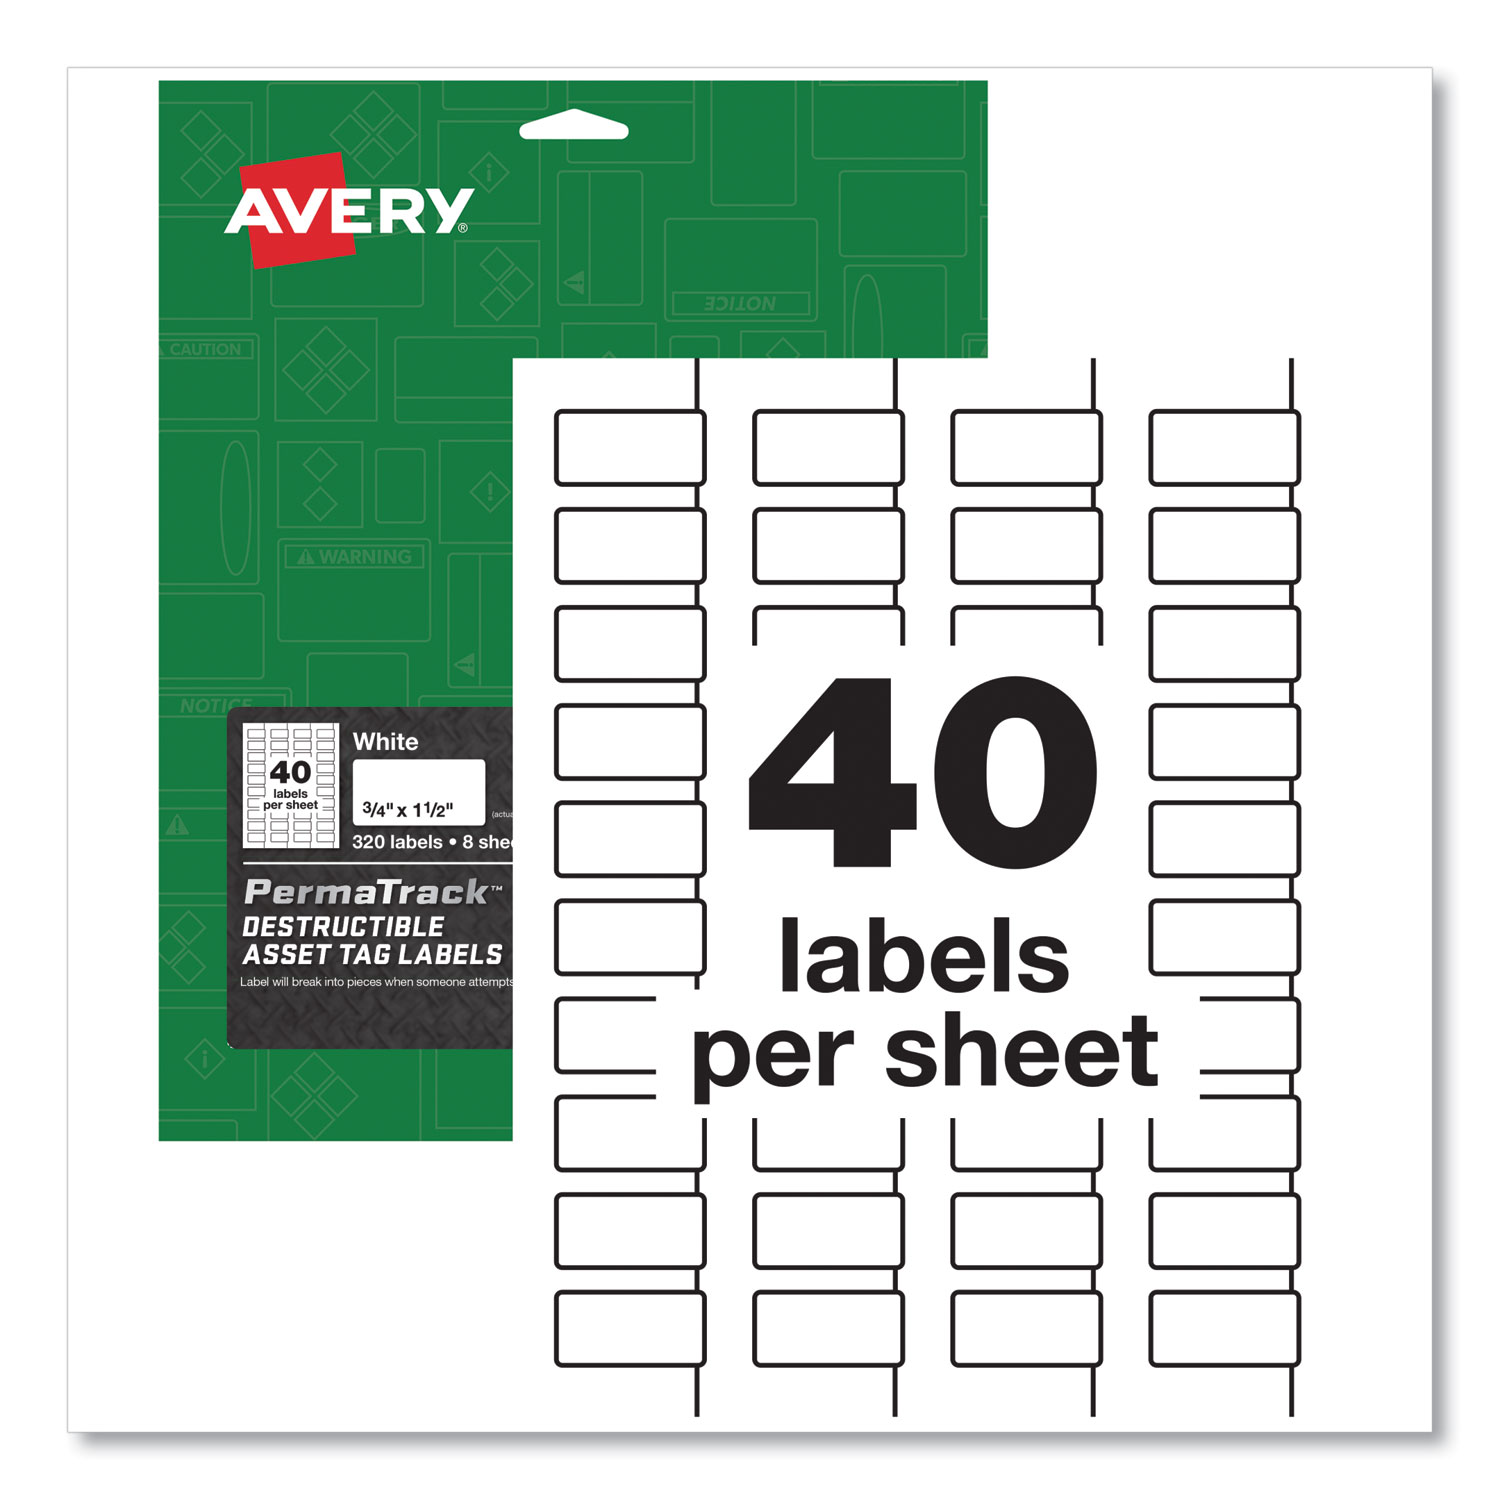  Avery 60529 PermaTrack Destructible Asset Tag Labels, Laser Printers, 0.75 x 1.5, White, 40/Sheet, 8 Sheets/Pack (AVE60529) 